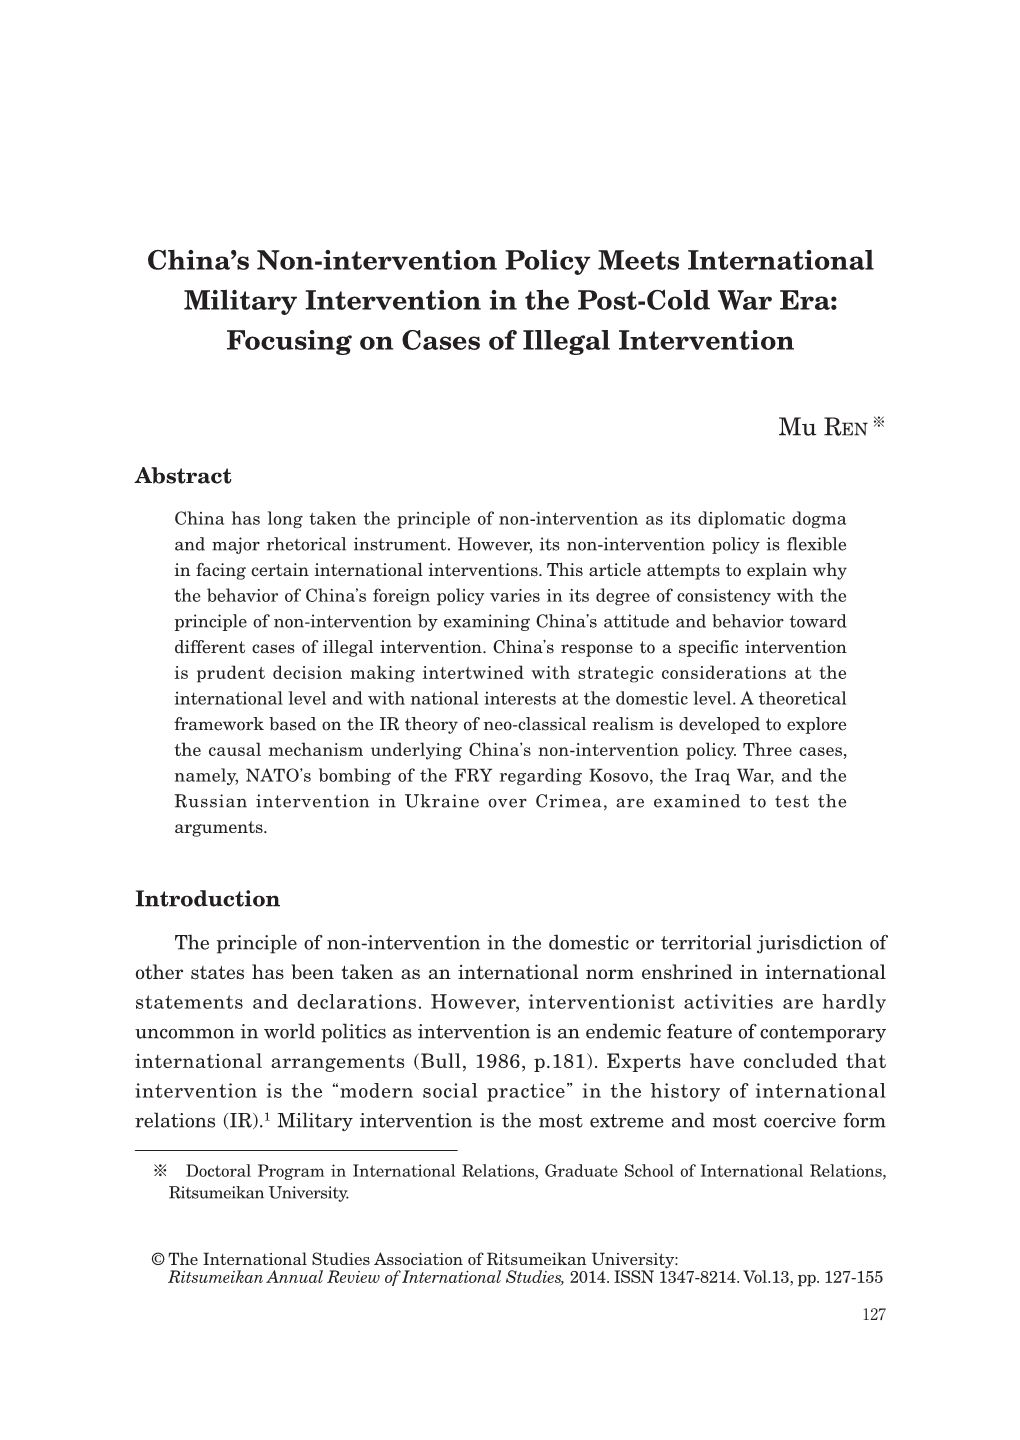 China's Non-Intervention Policy Meets International Military Intervention In